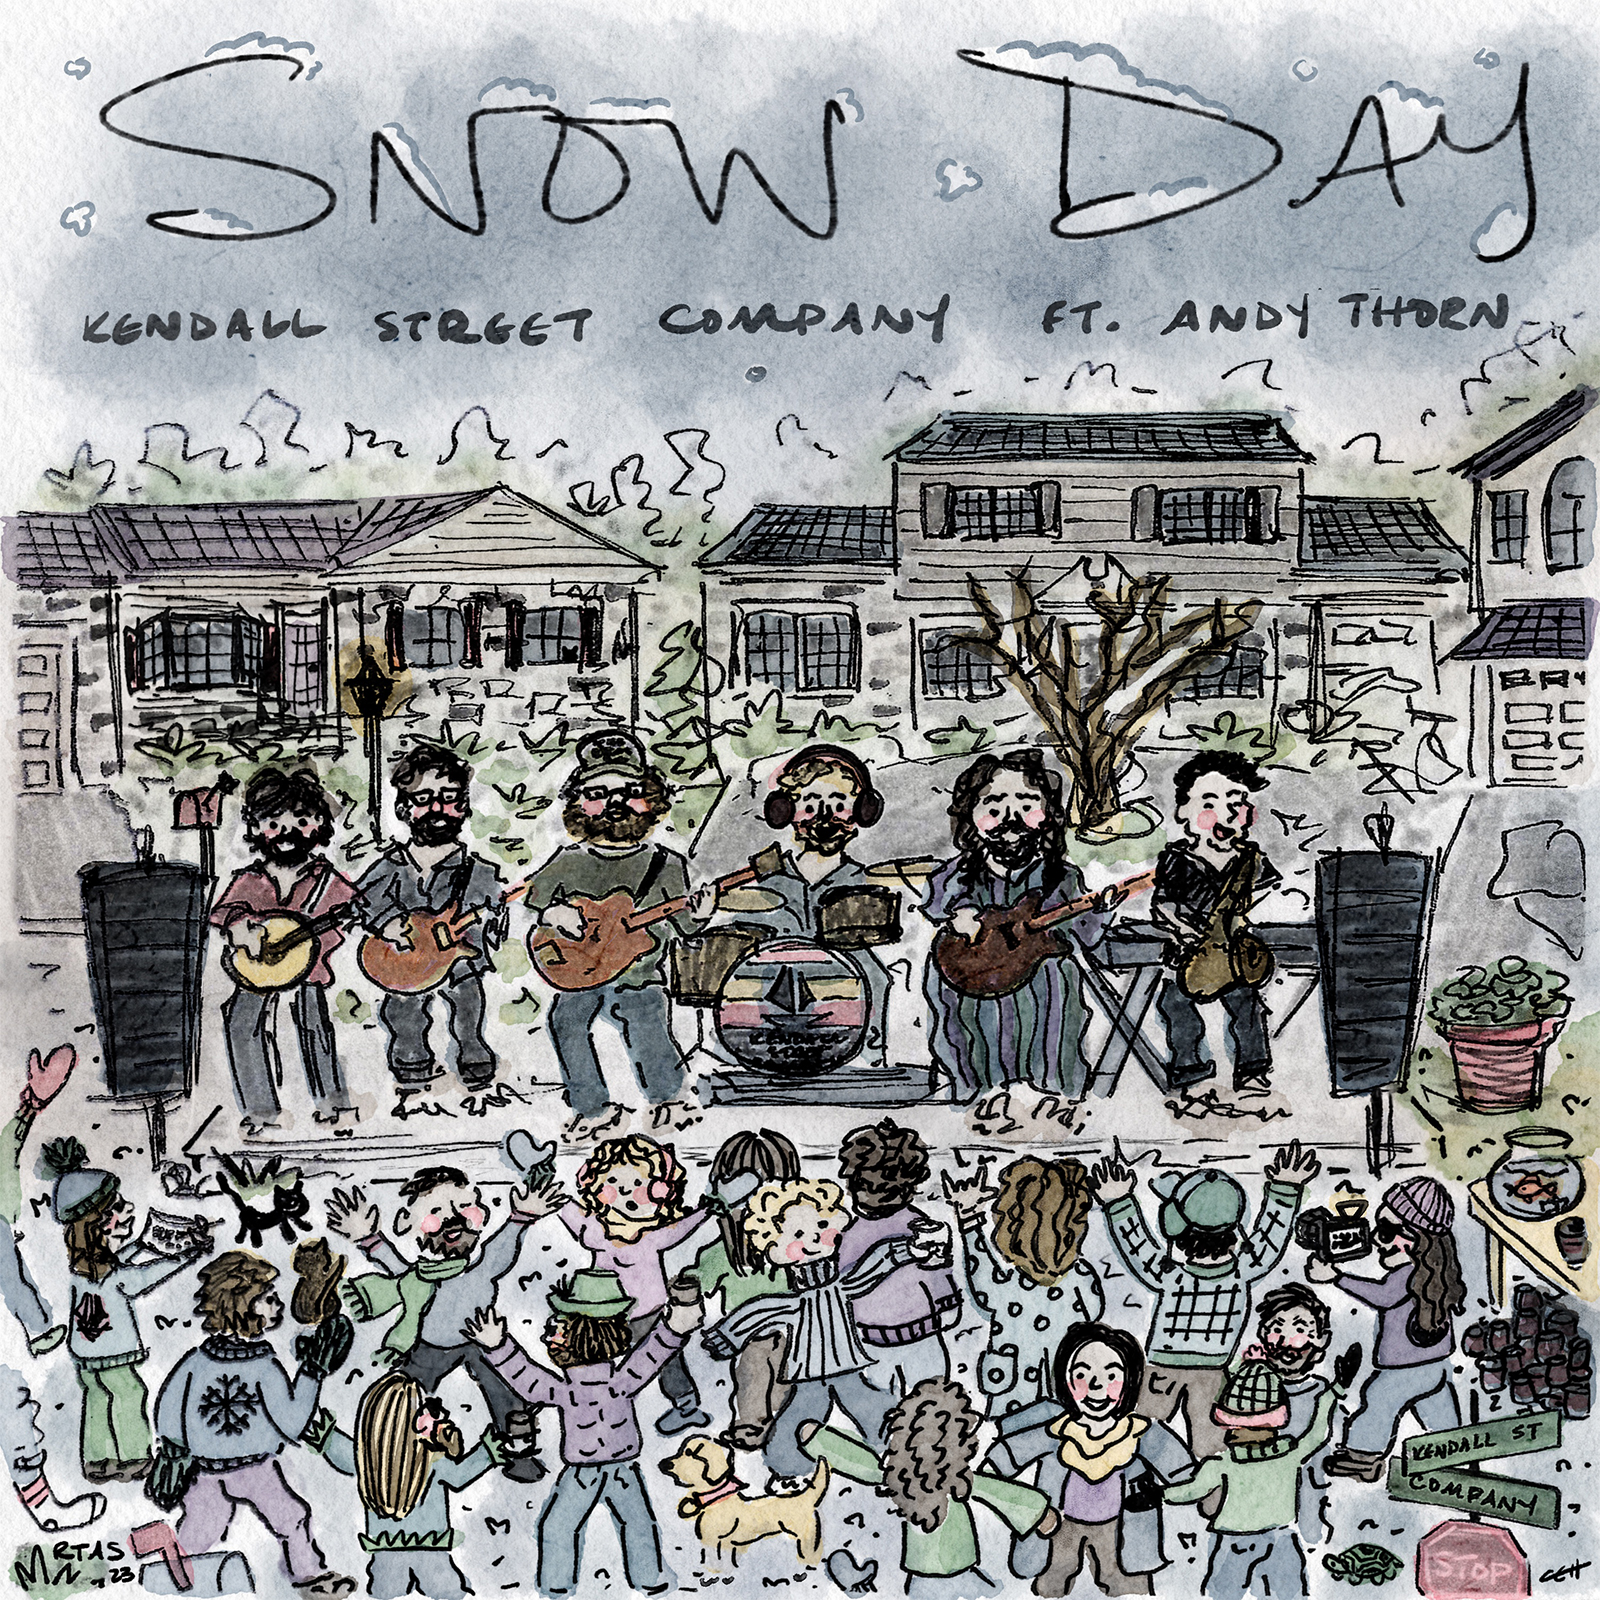 Kendall Street Company Unveils New Single "Snow Day"featuring Andy Thorn of Leftover Salmon